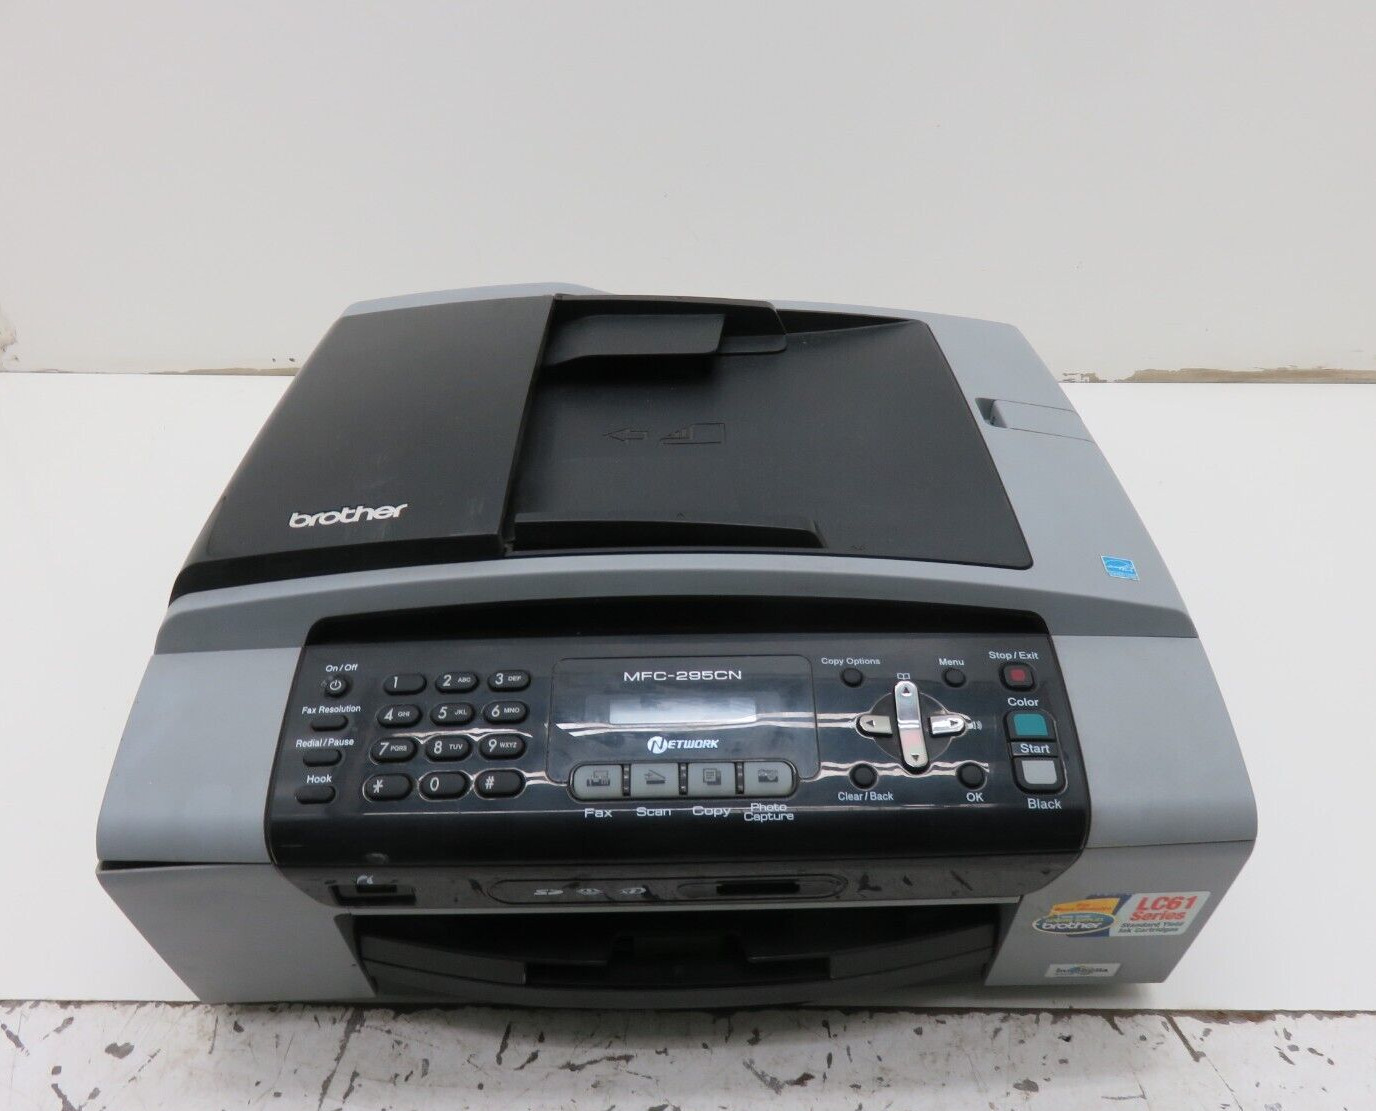 Brother MFC-295CN All-In-One Inkjet Printer - Unable To Test